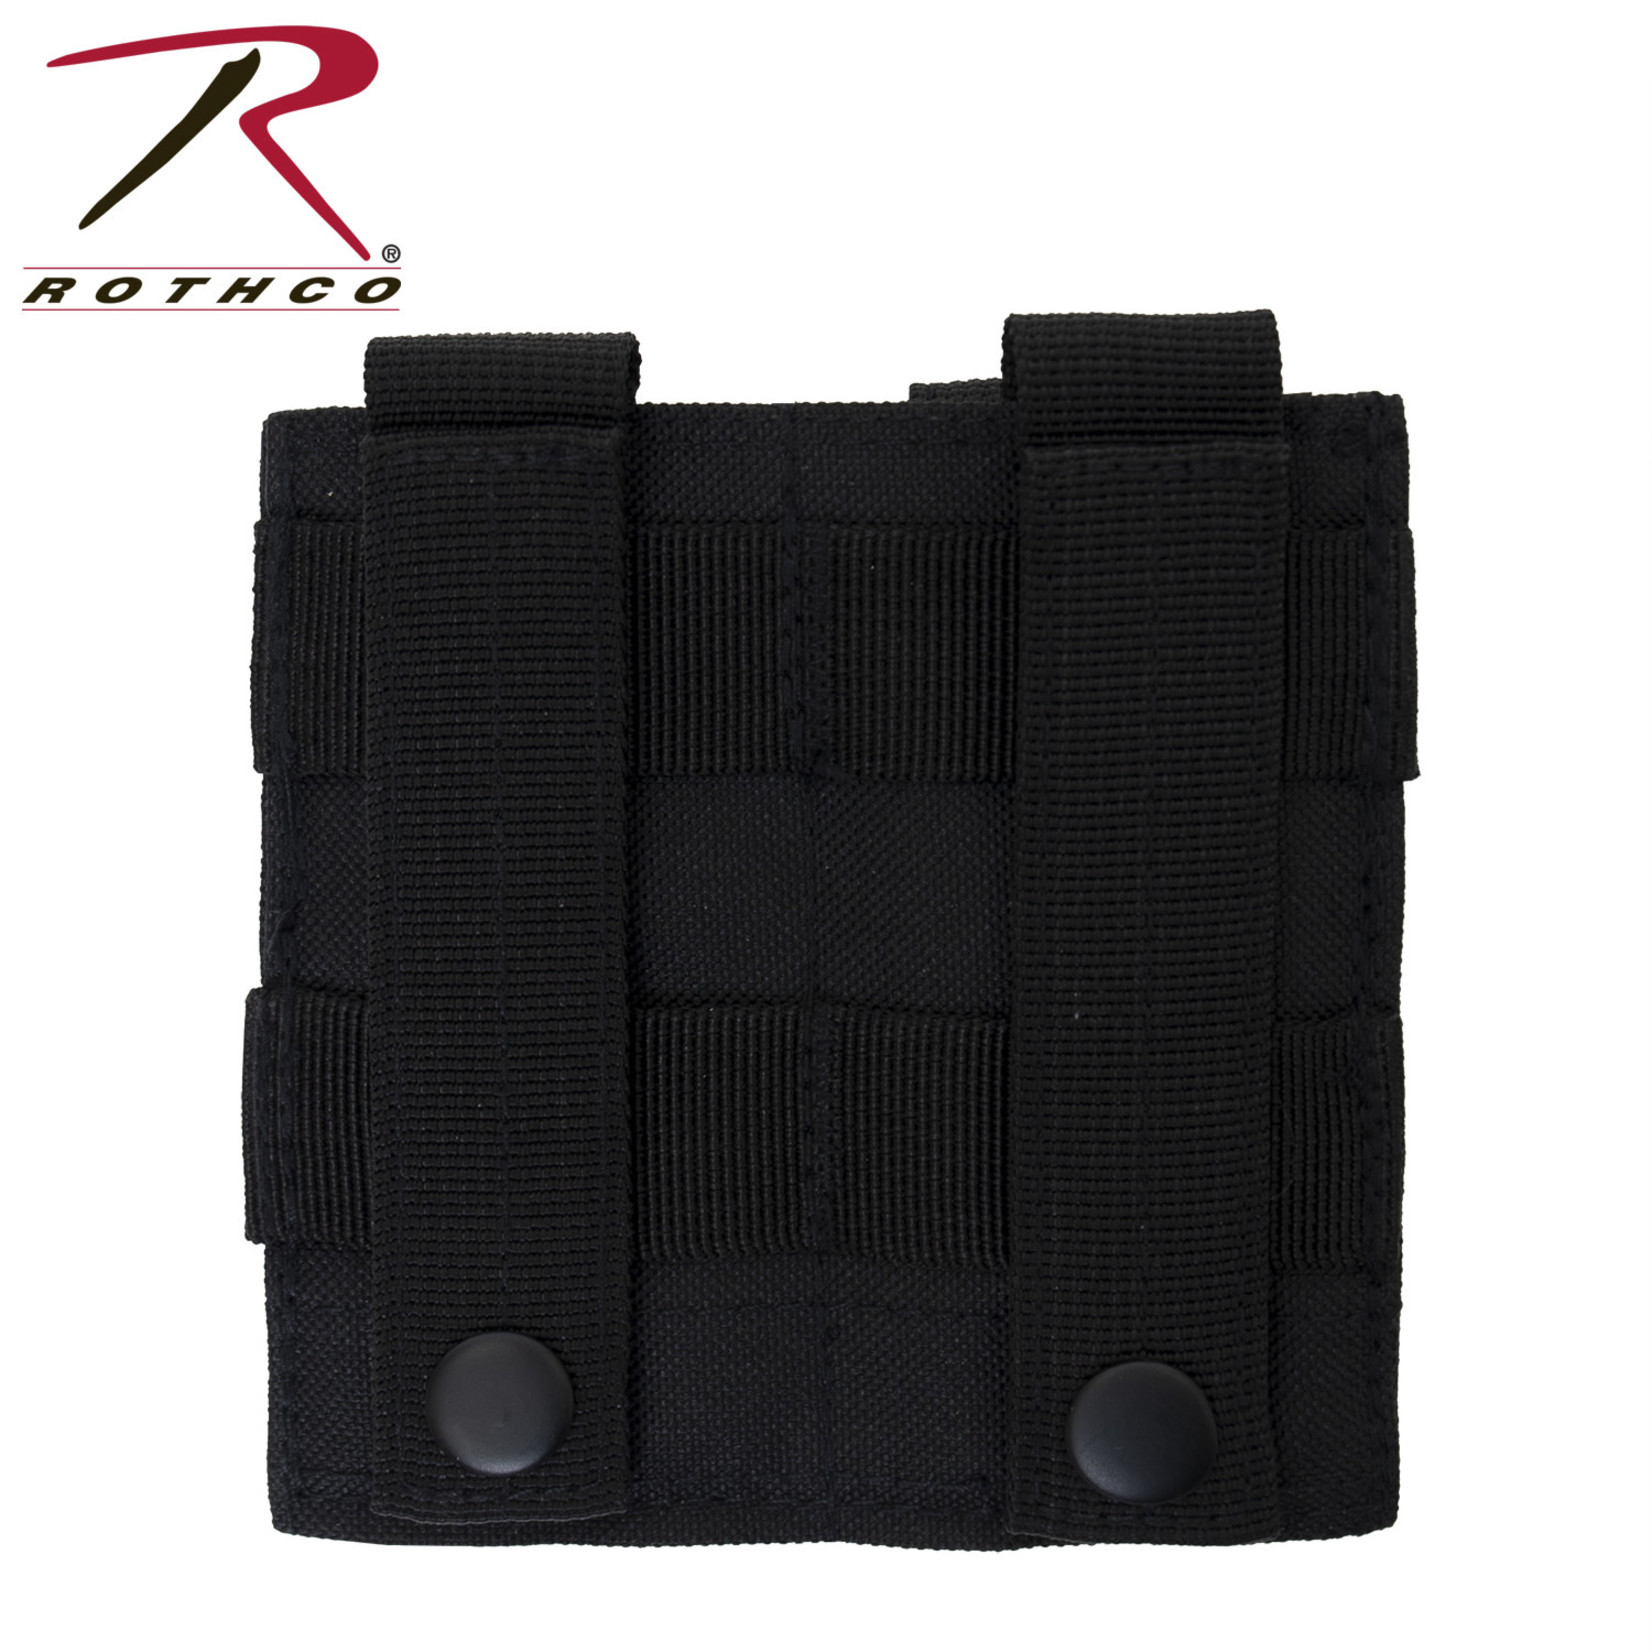 Rothco Rothco MOLLE Double Pistol Mag Pouch